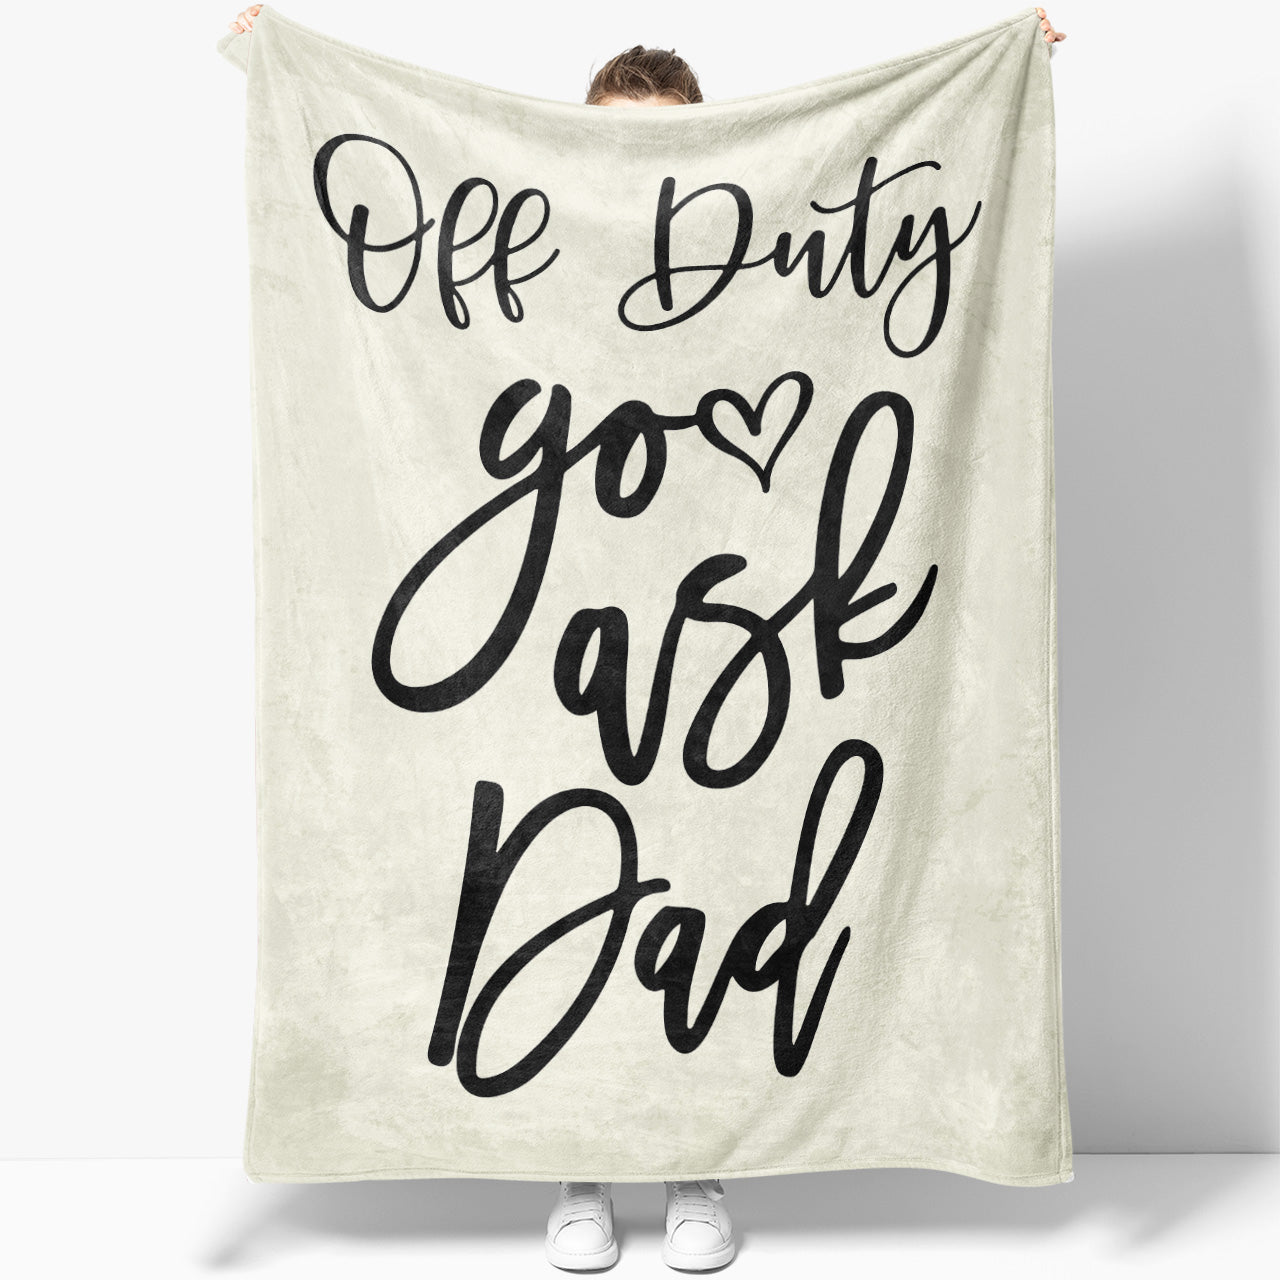 Blanket Gift Ideas For Mom, Go Ask Dad, Funny Mothers Day Blanket Gift